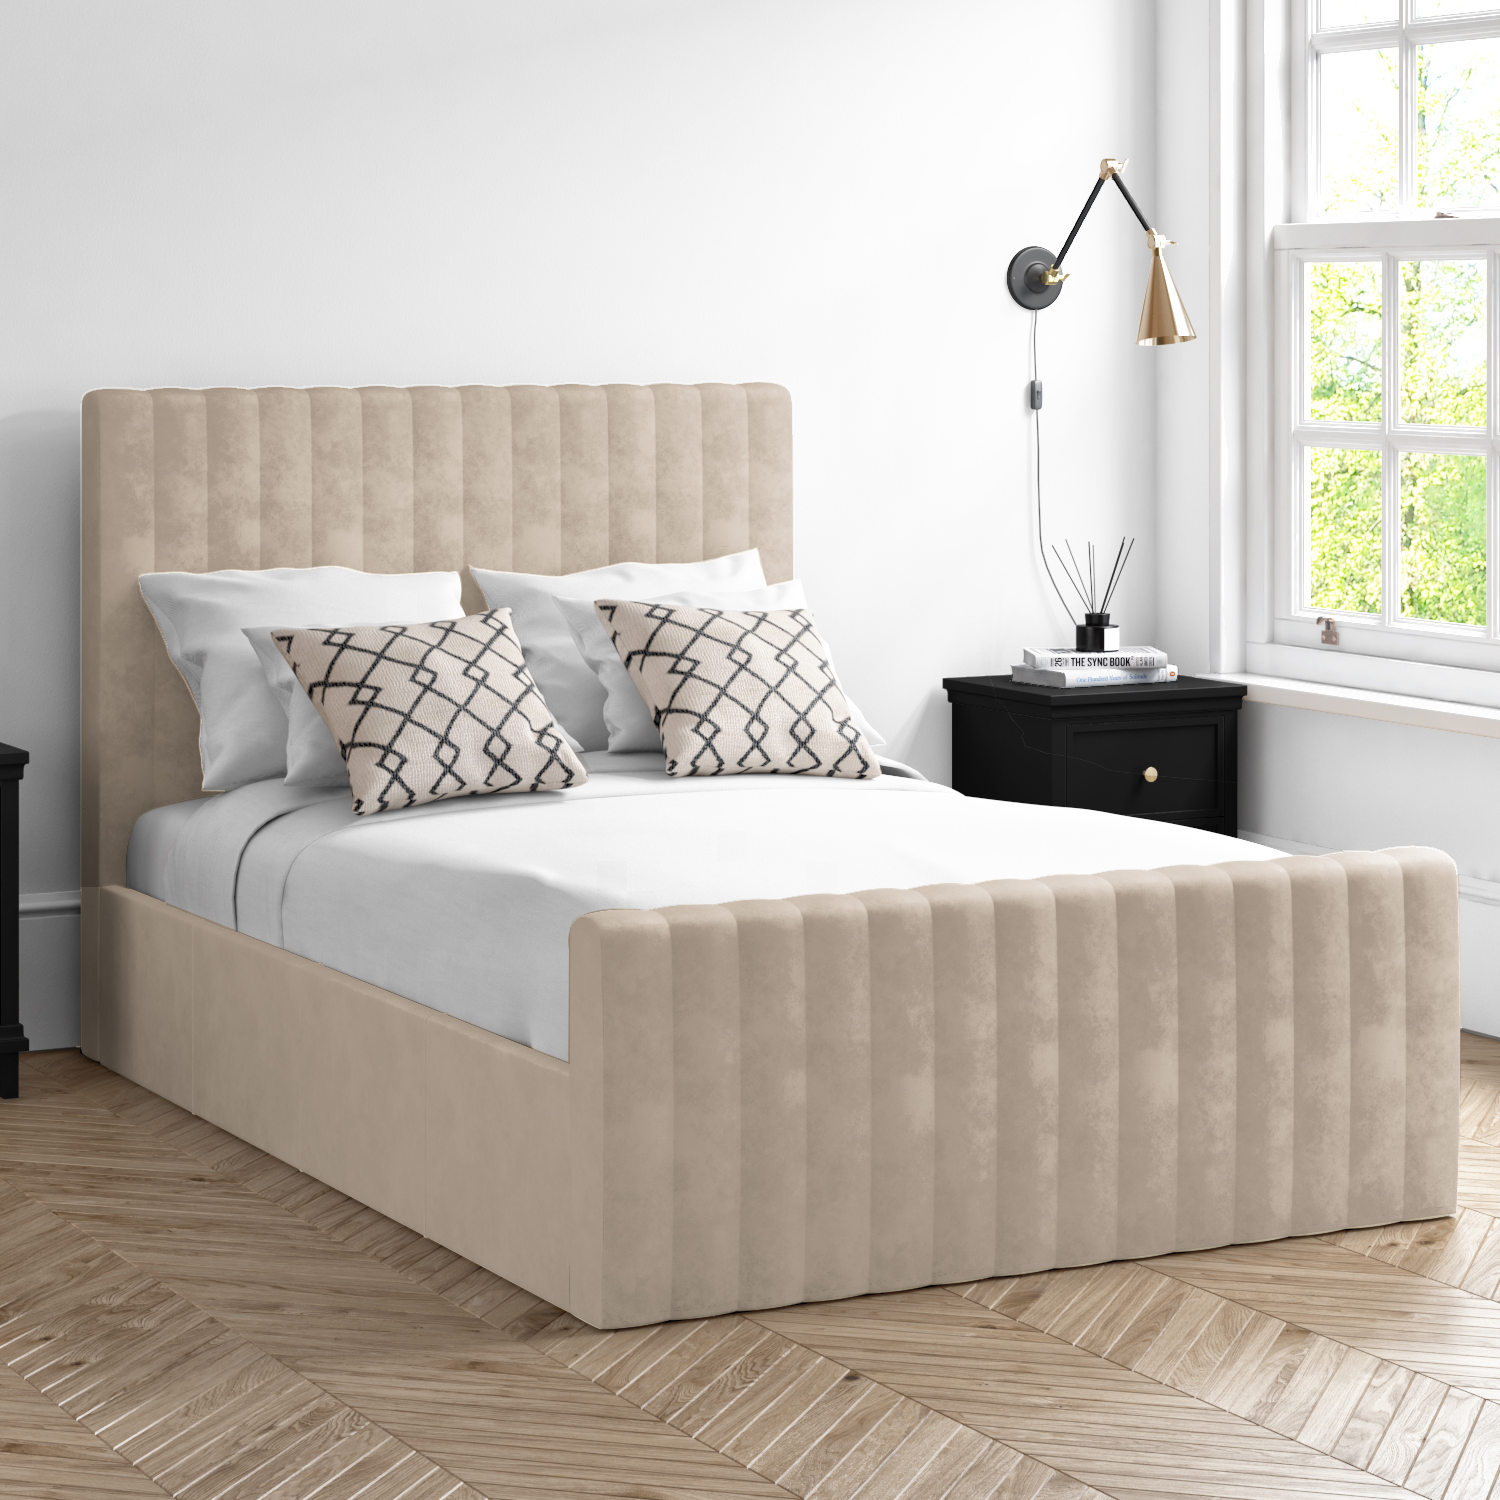 Read more about Small double ottoman bed in beige velvet khloe